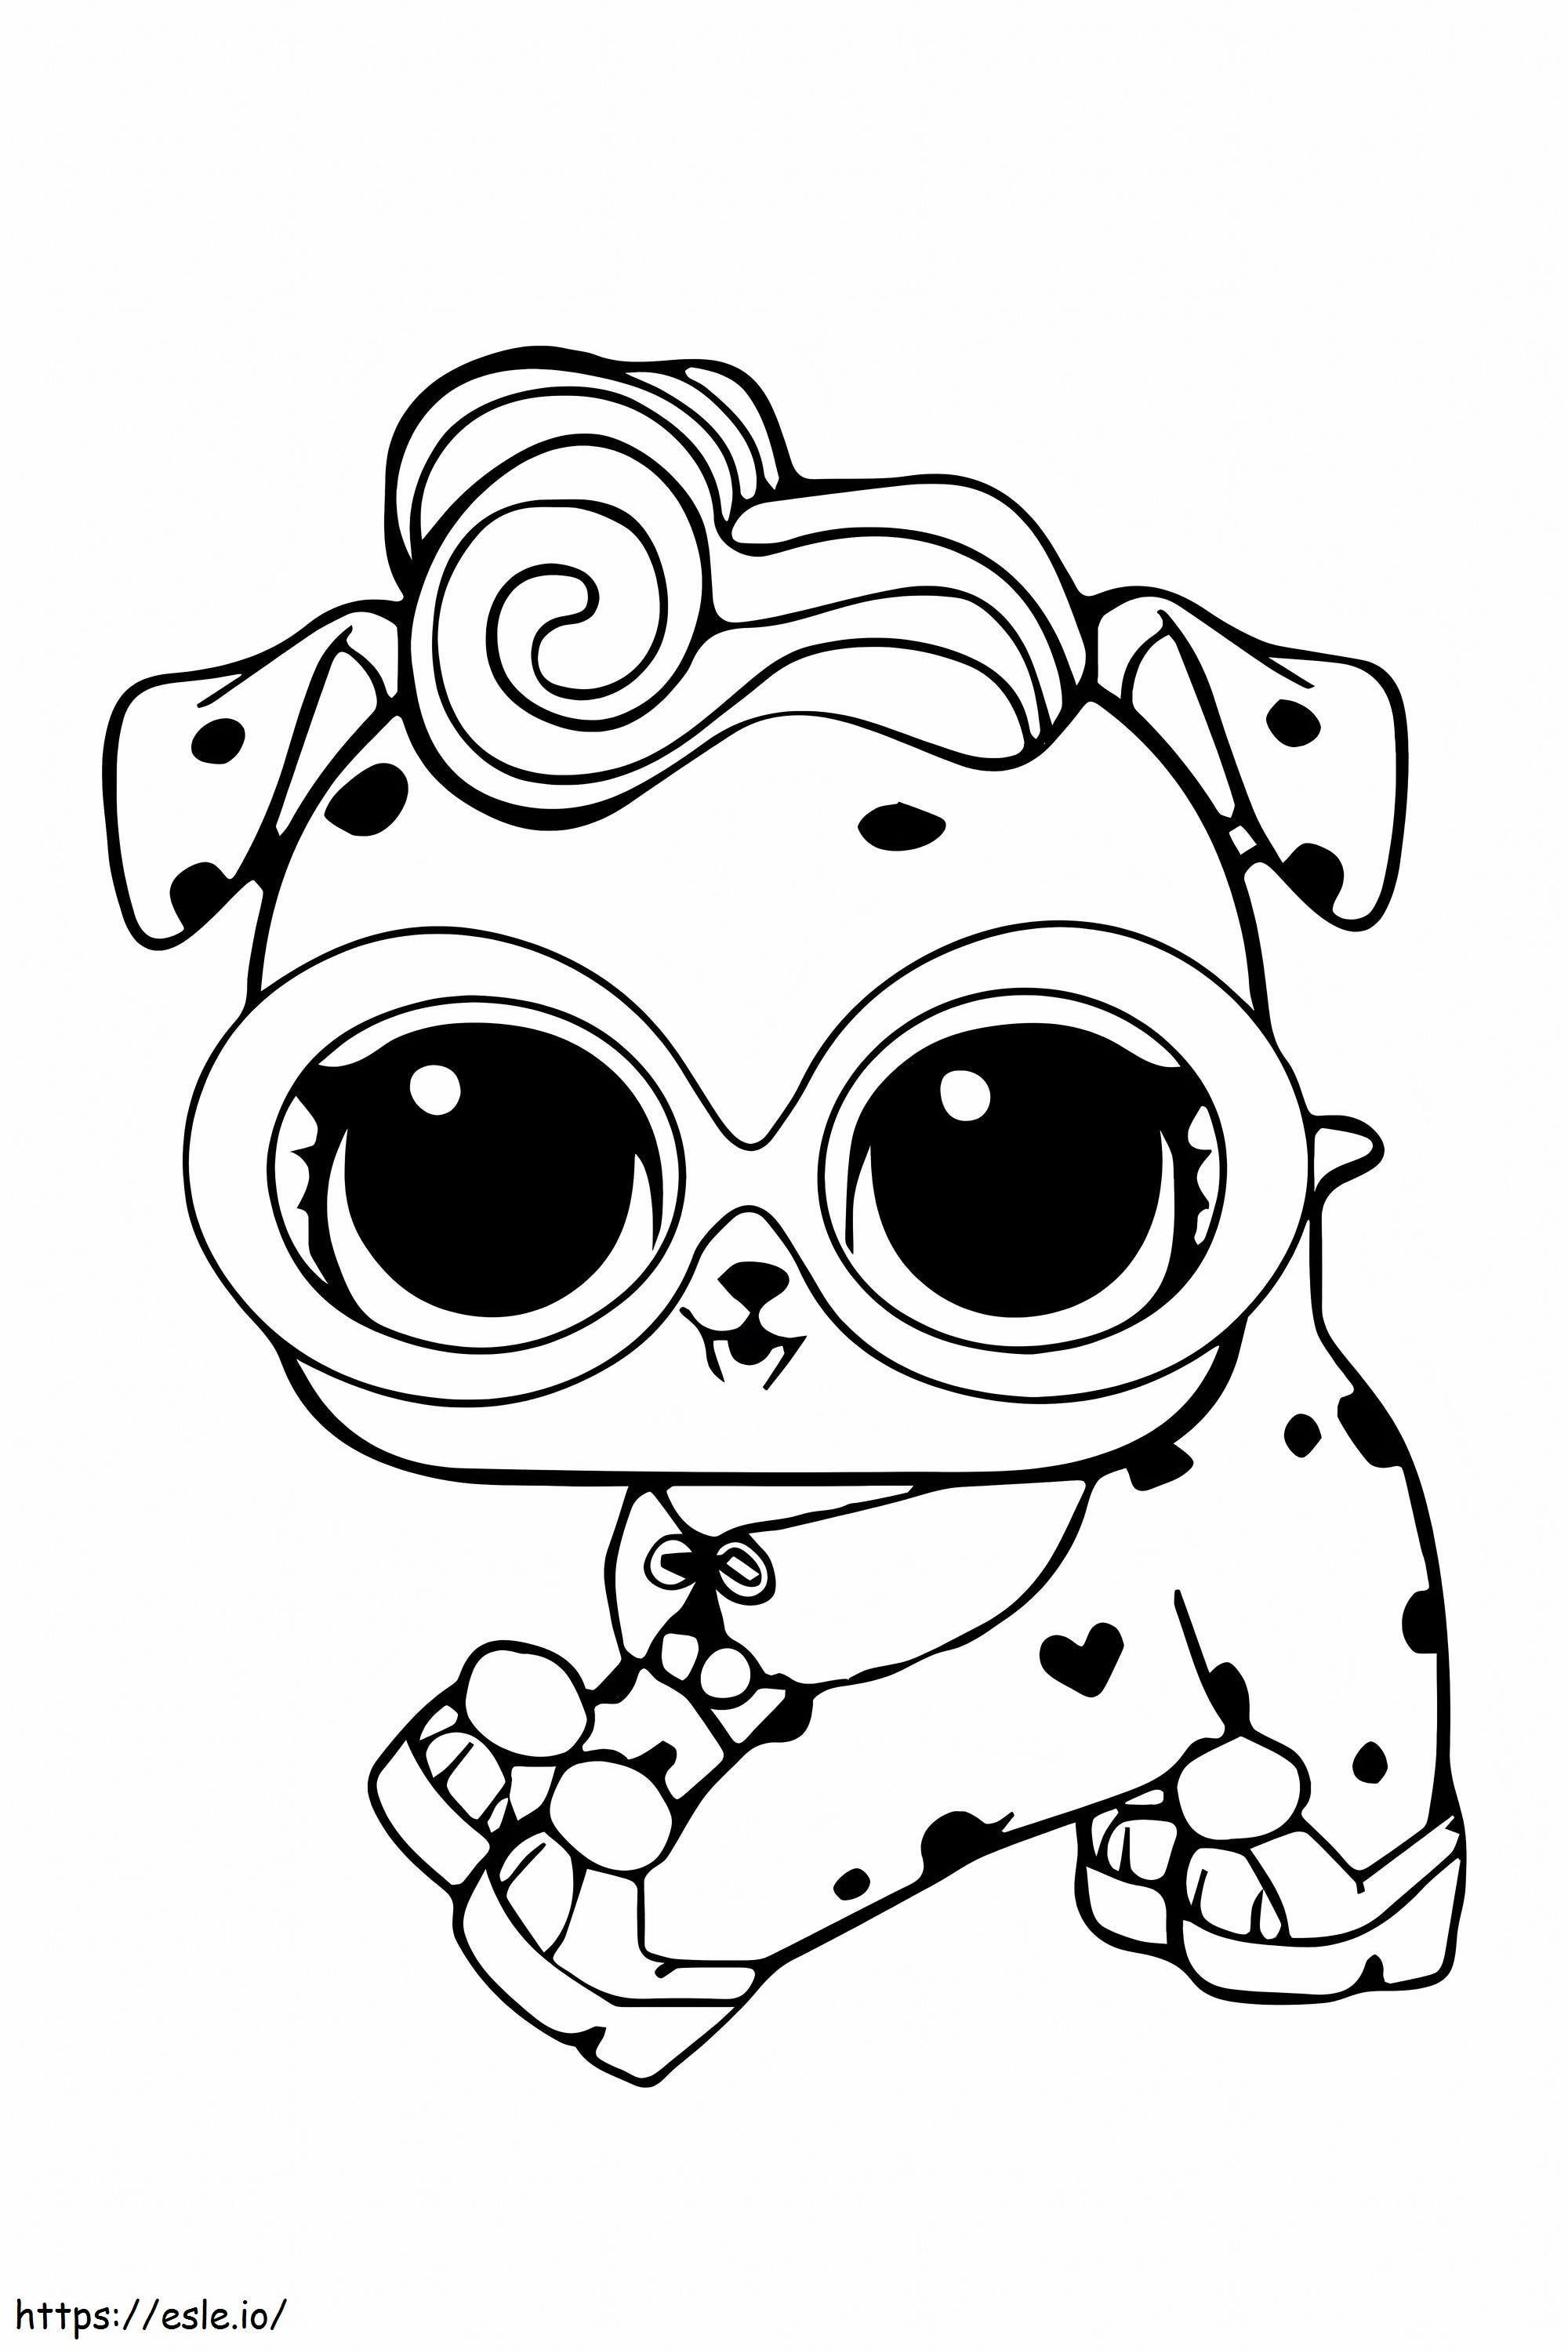 LOL Pets Dolmatinets coloring page